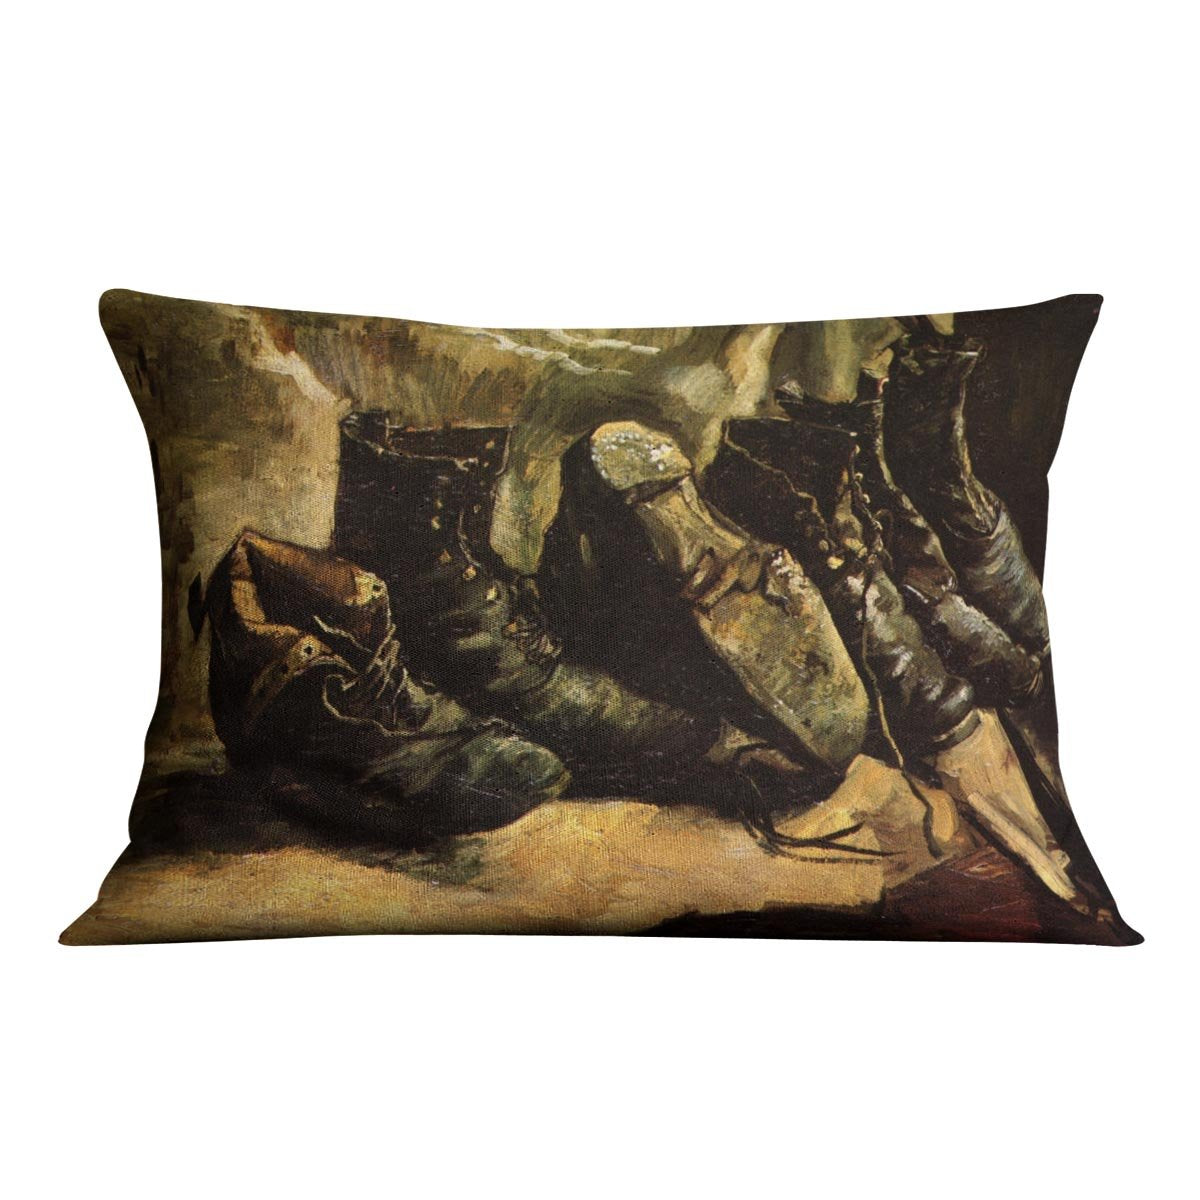 Three Pairs of Shoes by Van Gogh Throw Pillow